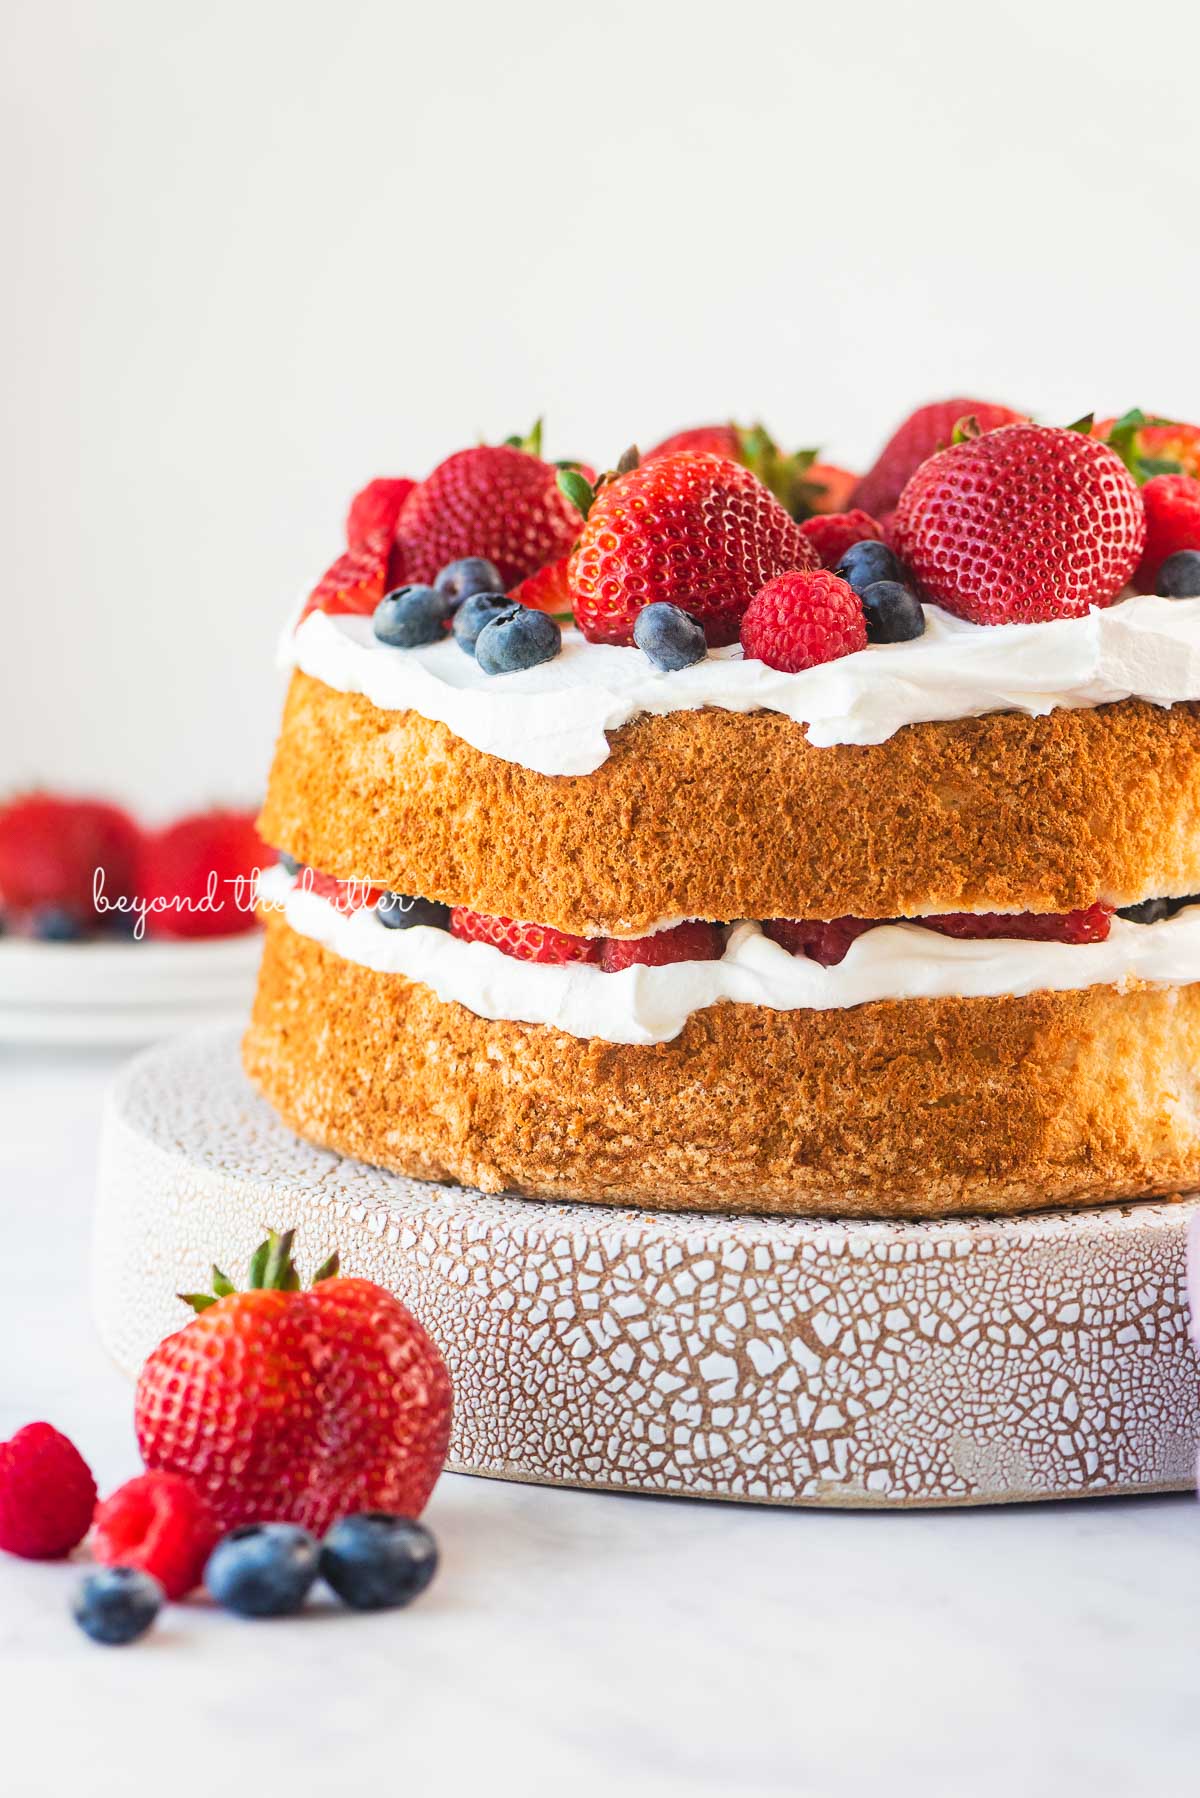 Homemade angel food cake layered with cool whip and fresh berries on a ceramic cake stand with a white background | © Beyond the Butter®